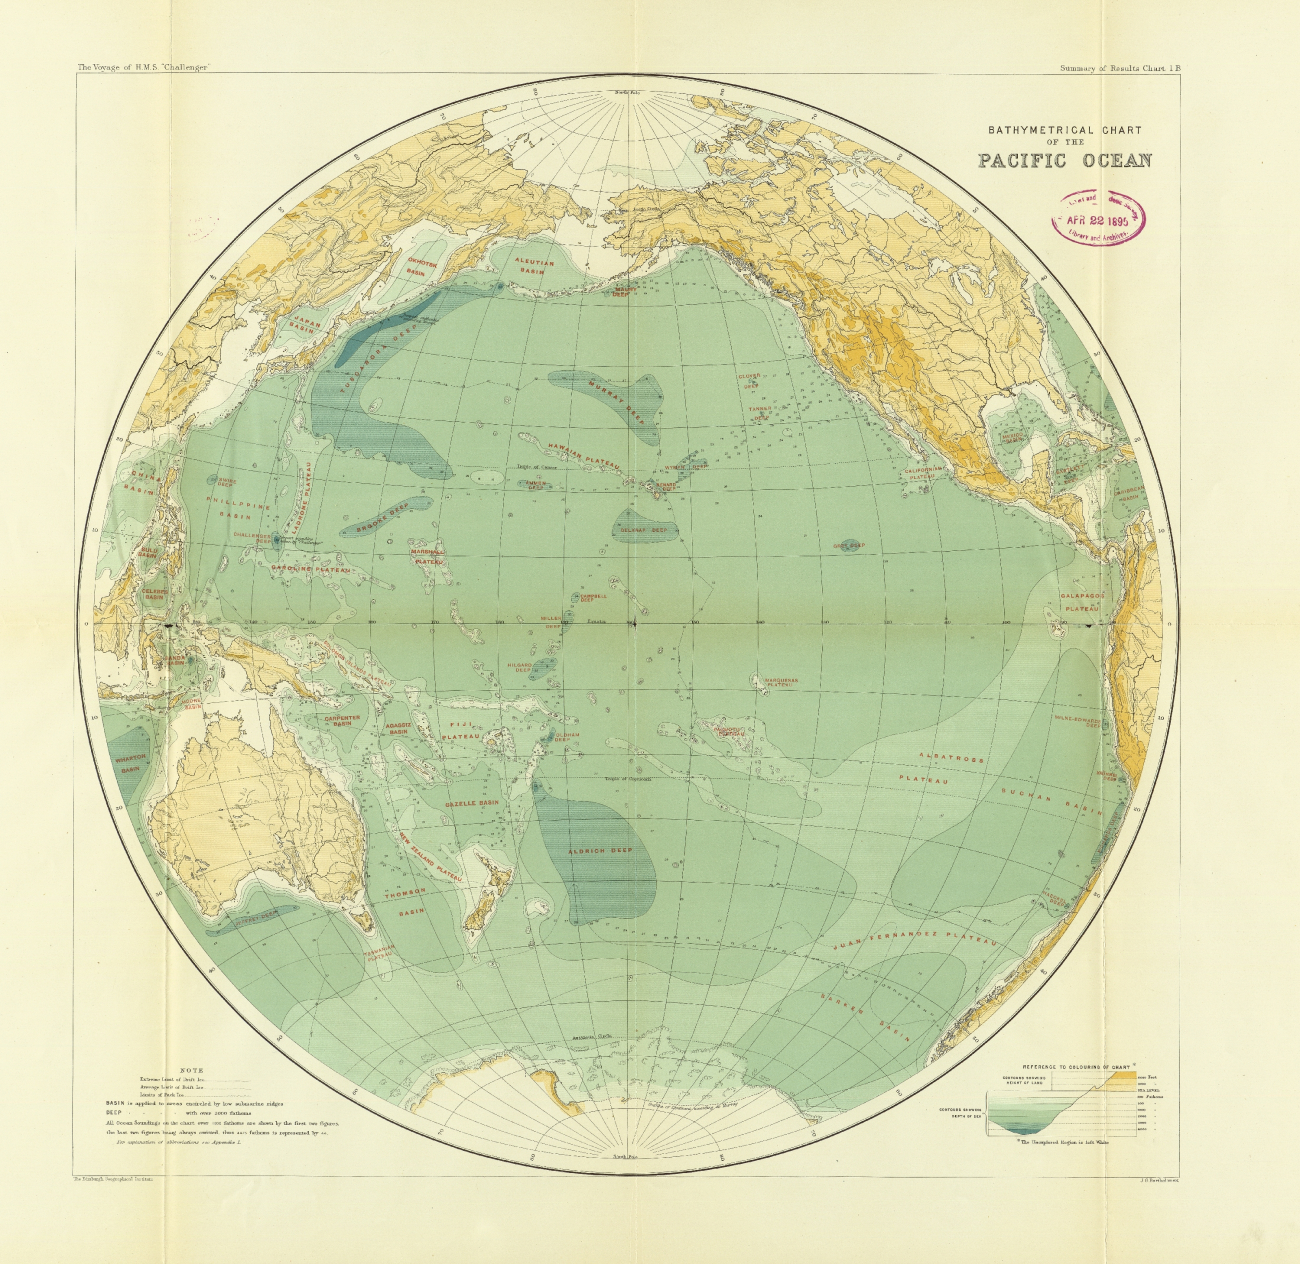 Sir John Murray's map of the Pacific Ocean, Chart 1B, accompanying theSummary of Results of the Challenger Expedition, 1895